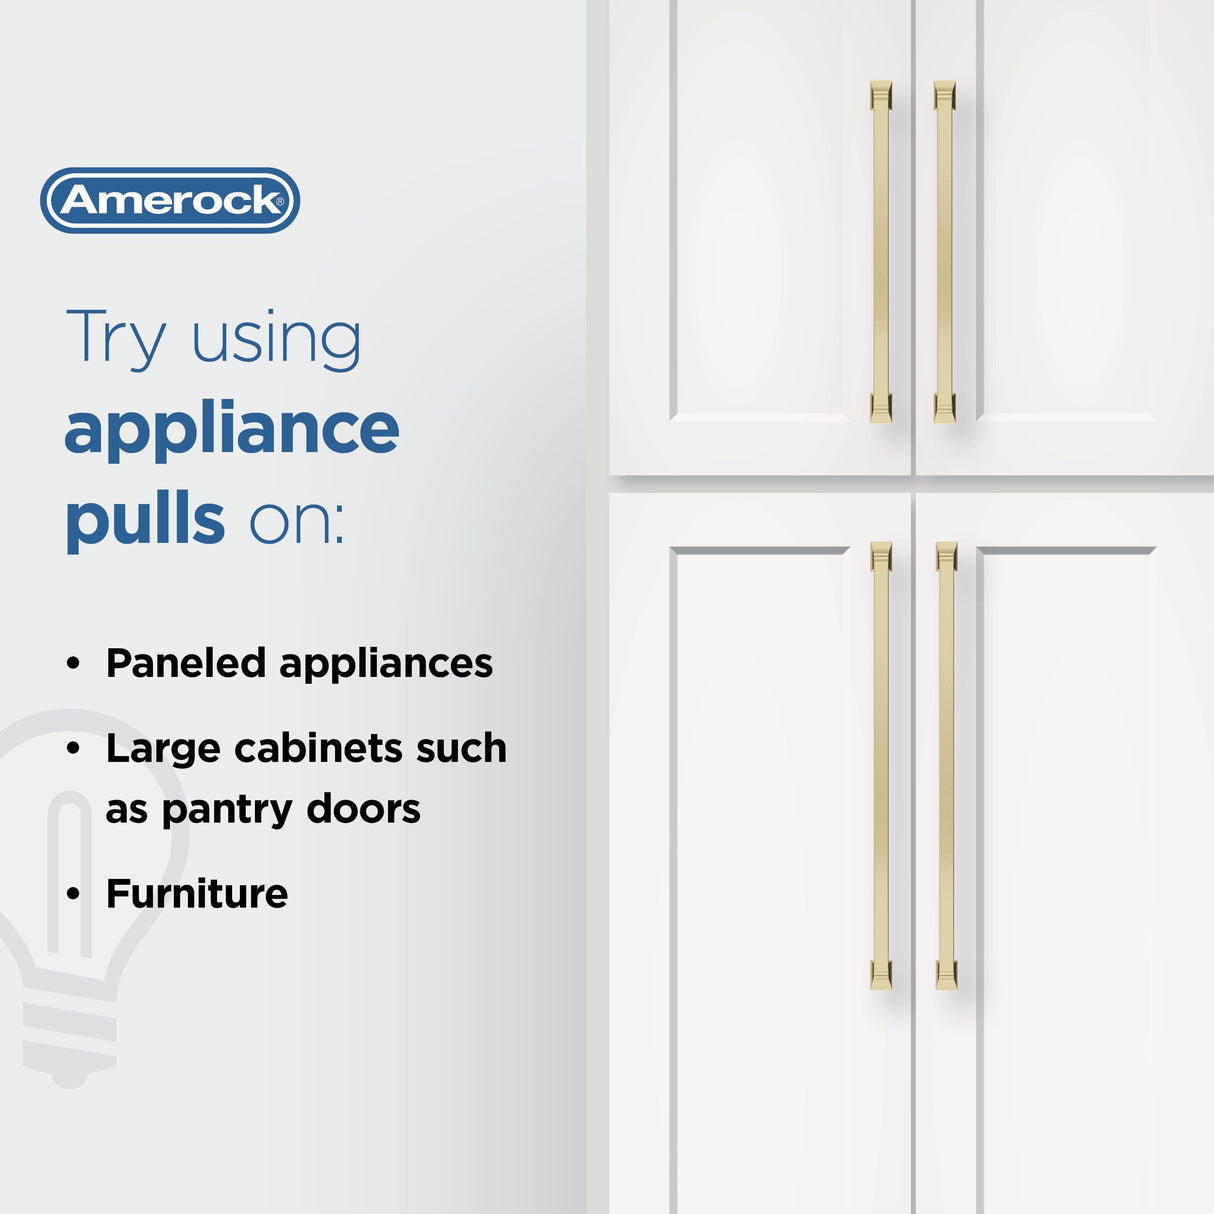 Amerock Appliance Pull Polished Nickel 18 inch (457 mm) Center to Center Bar Pulls 1 Pack Drawer Pull Drawer Handle Cabinet Hardware